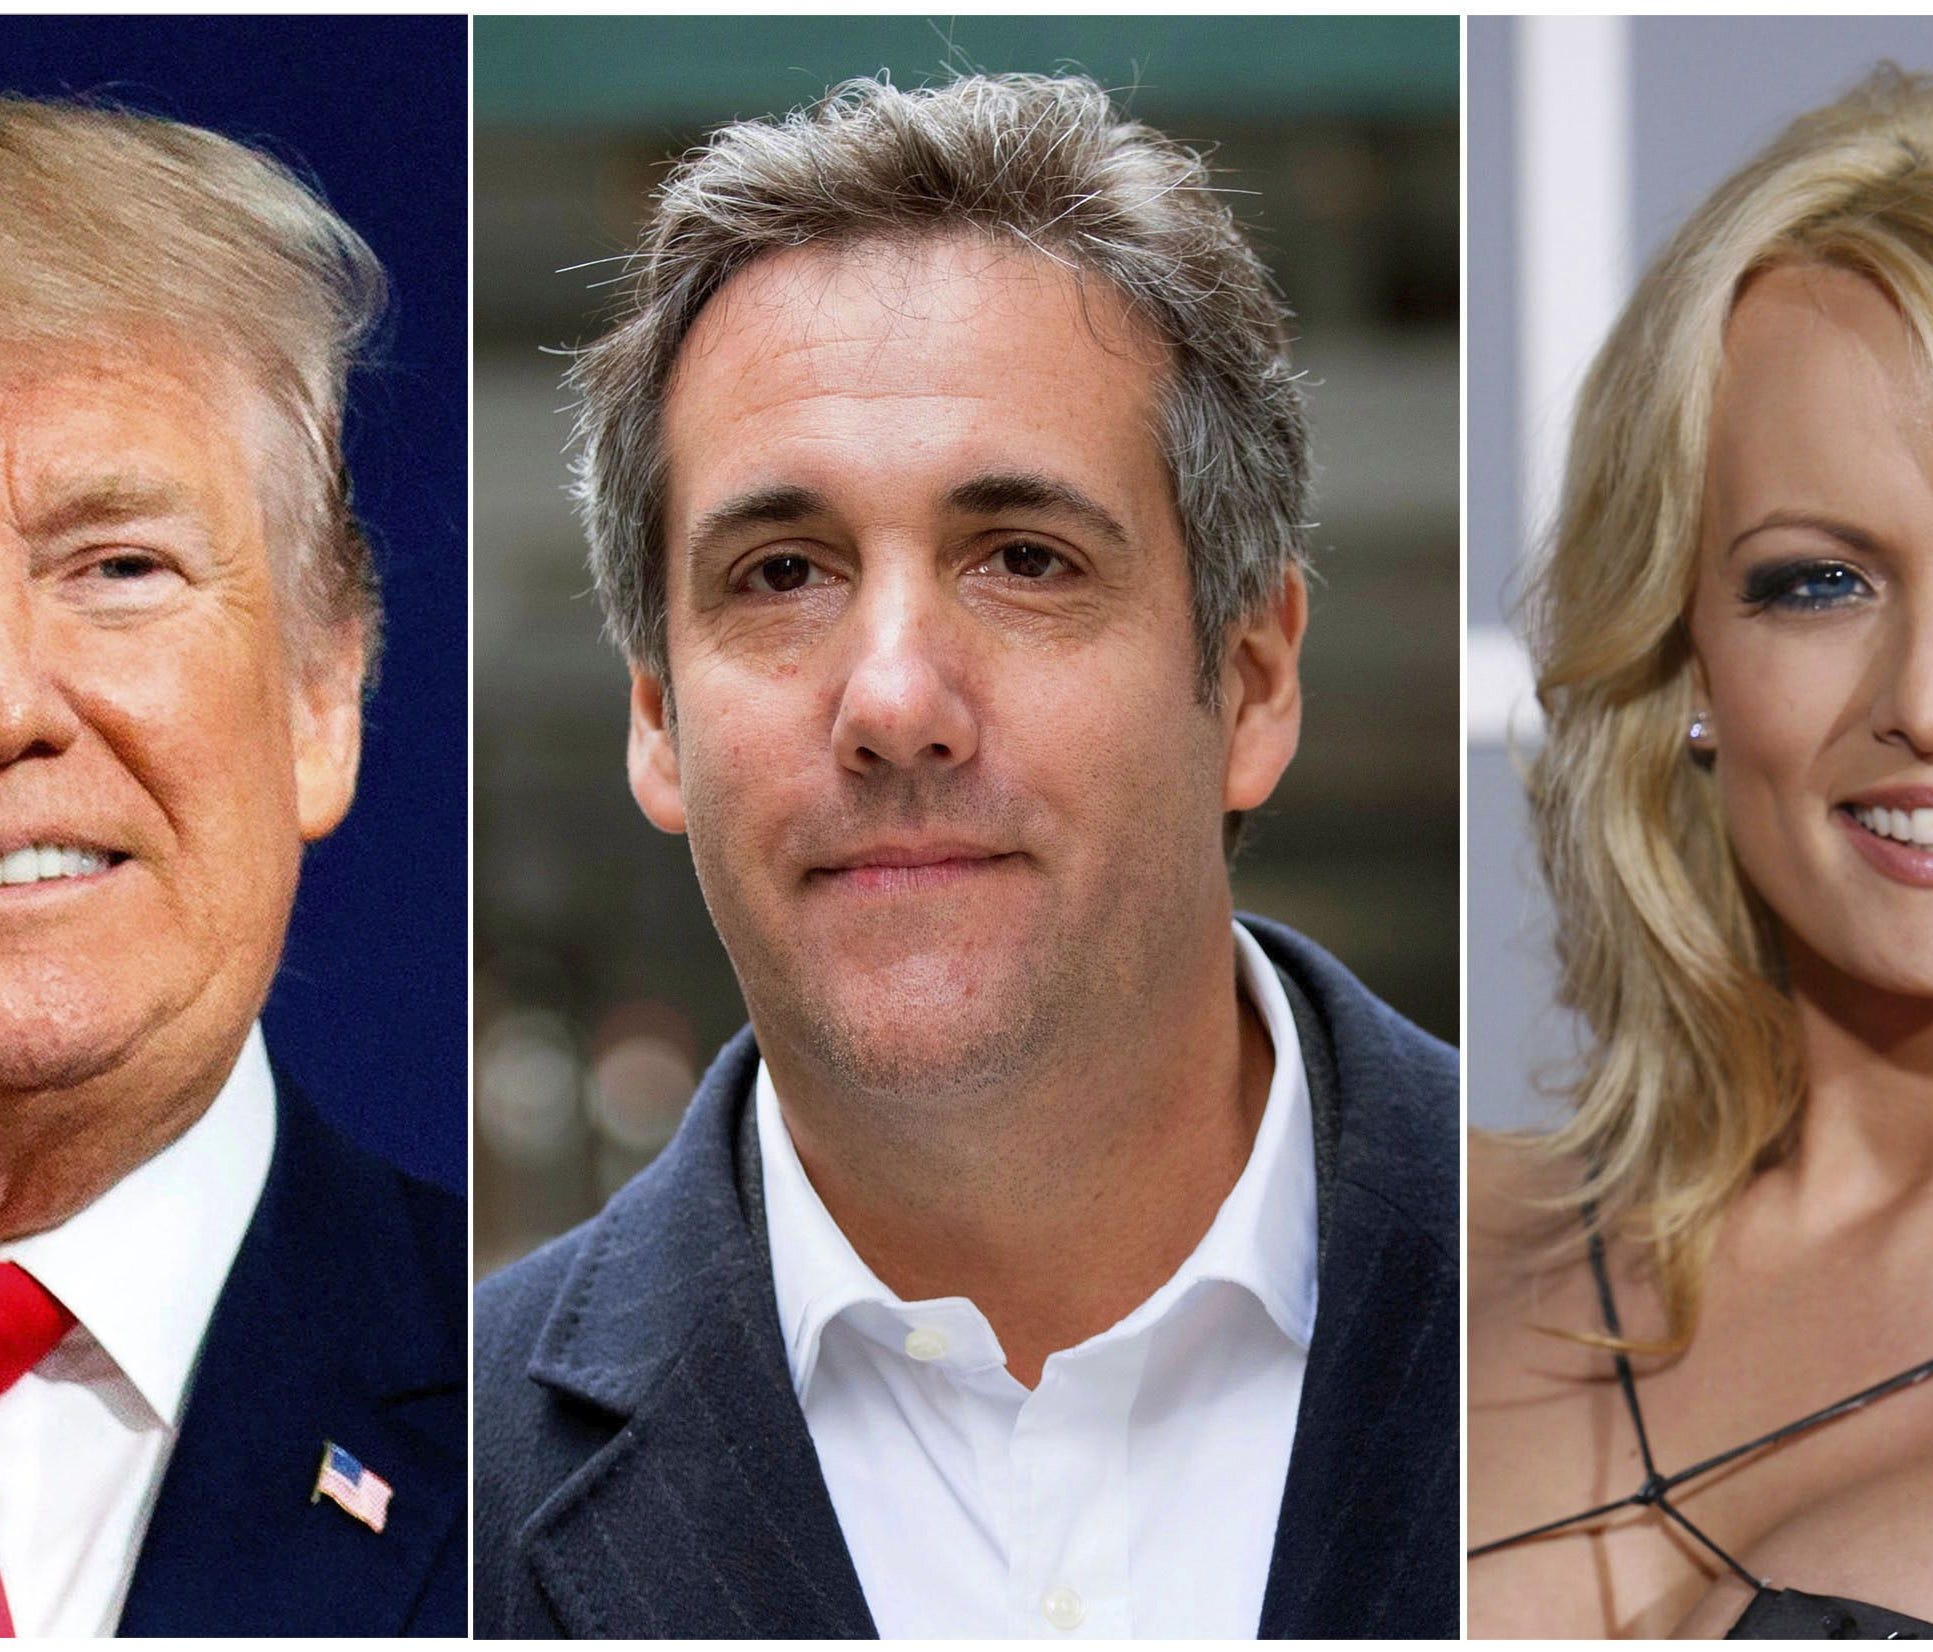 President Trump, attorney Michael Cohen and adult film actress Stormy Daniels.